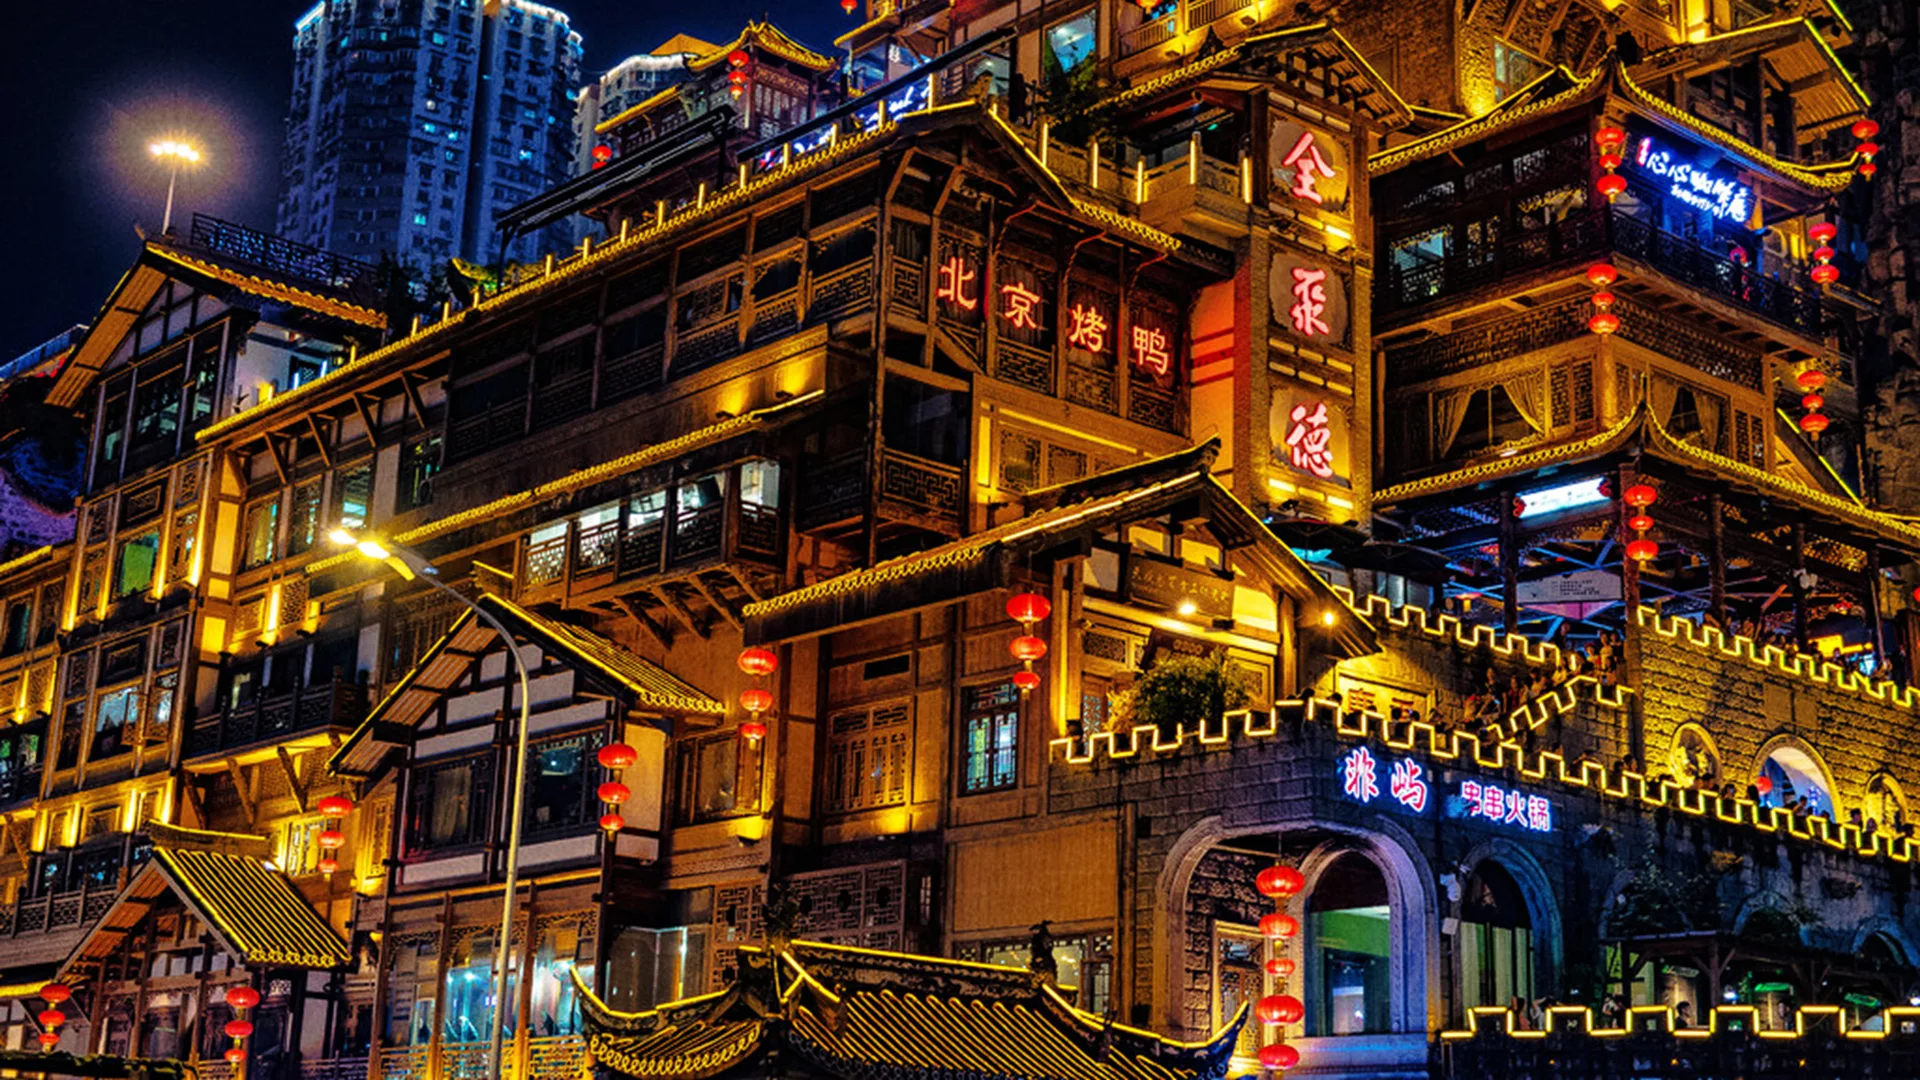 A photo of Chinese town scene lit up at night of buildings with lanterns